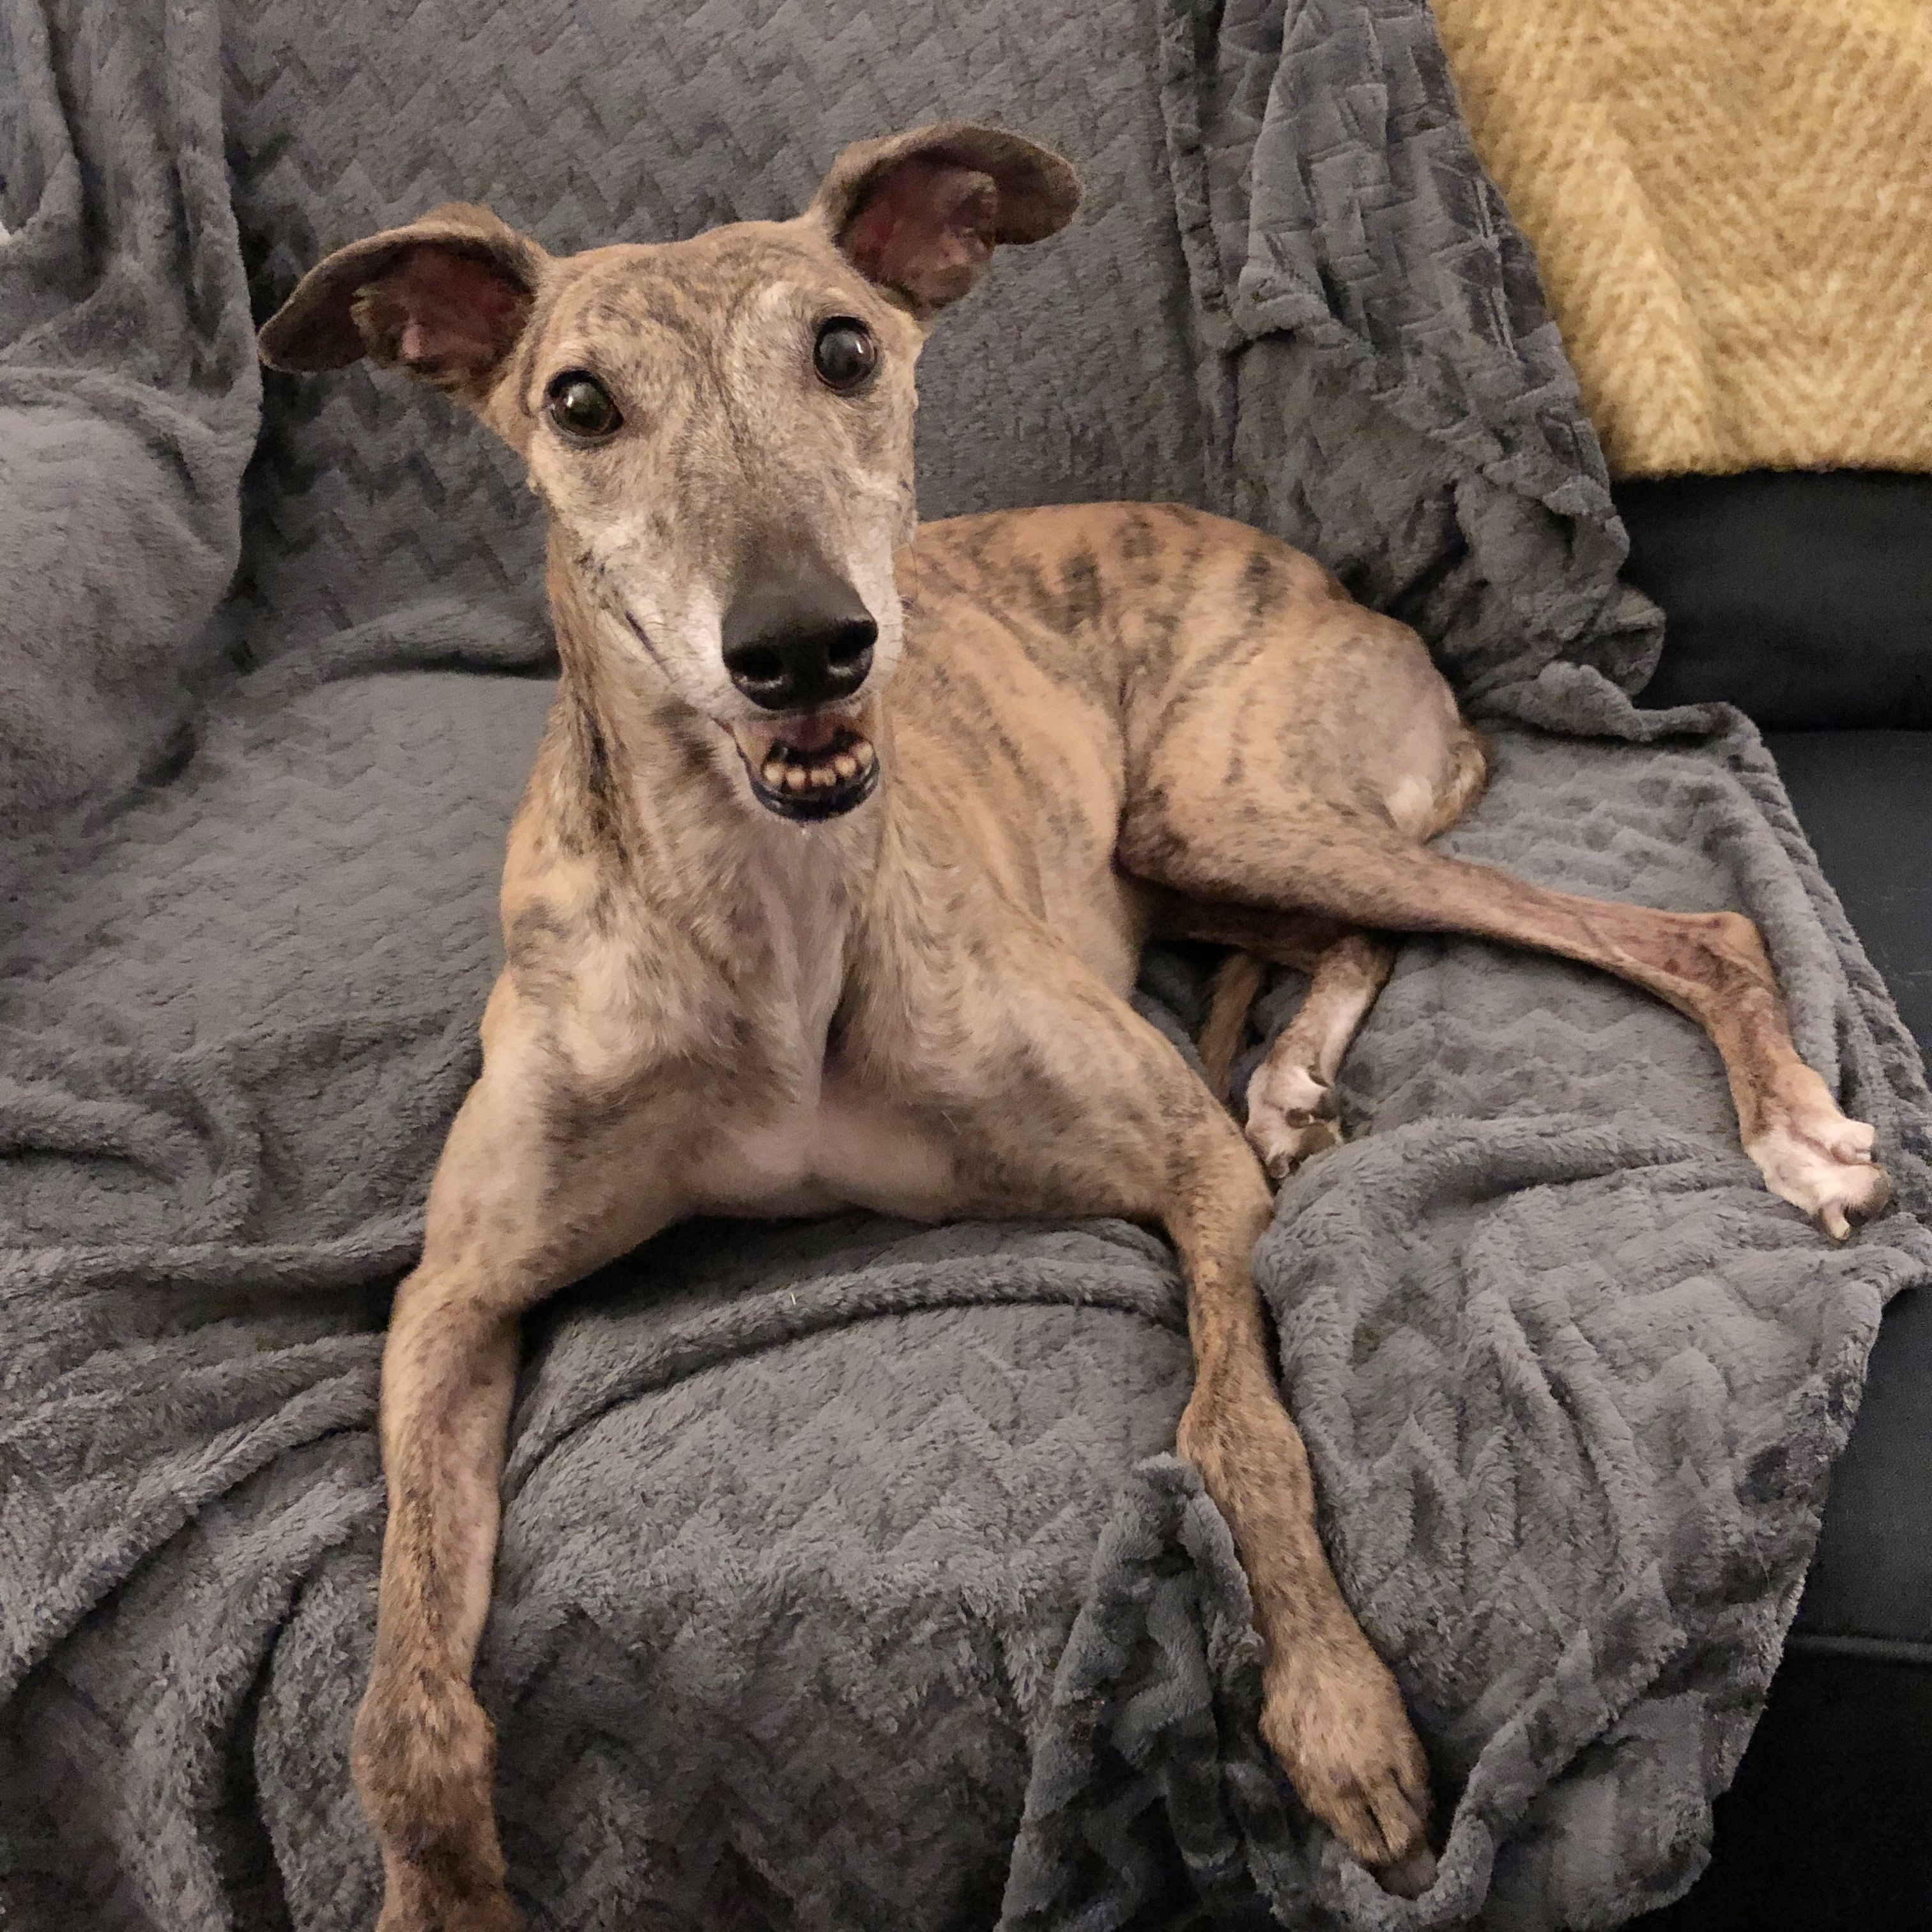 The cutest greyhound in the world